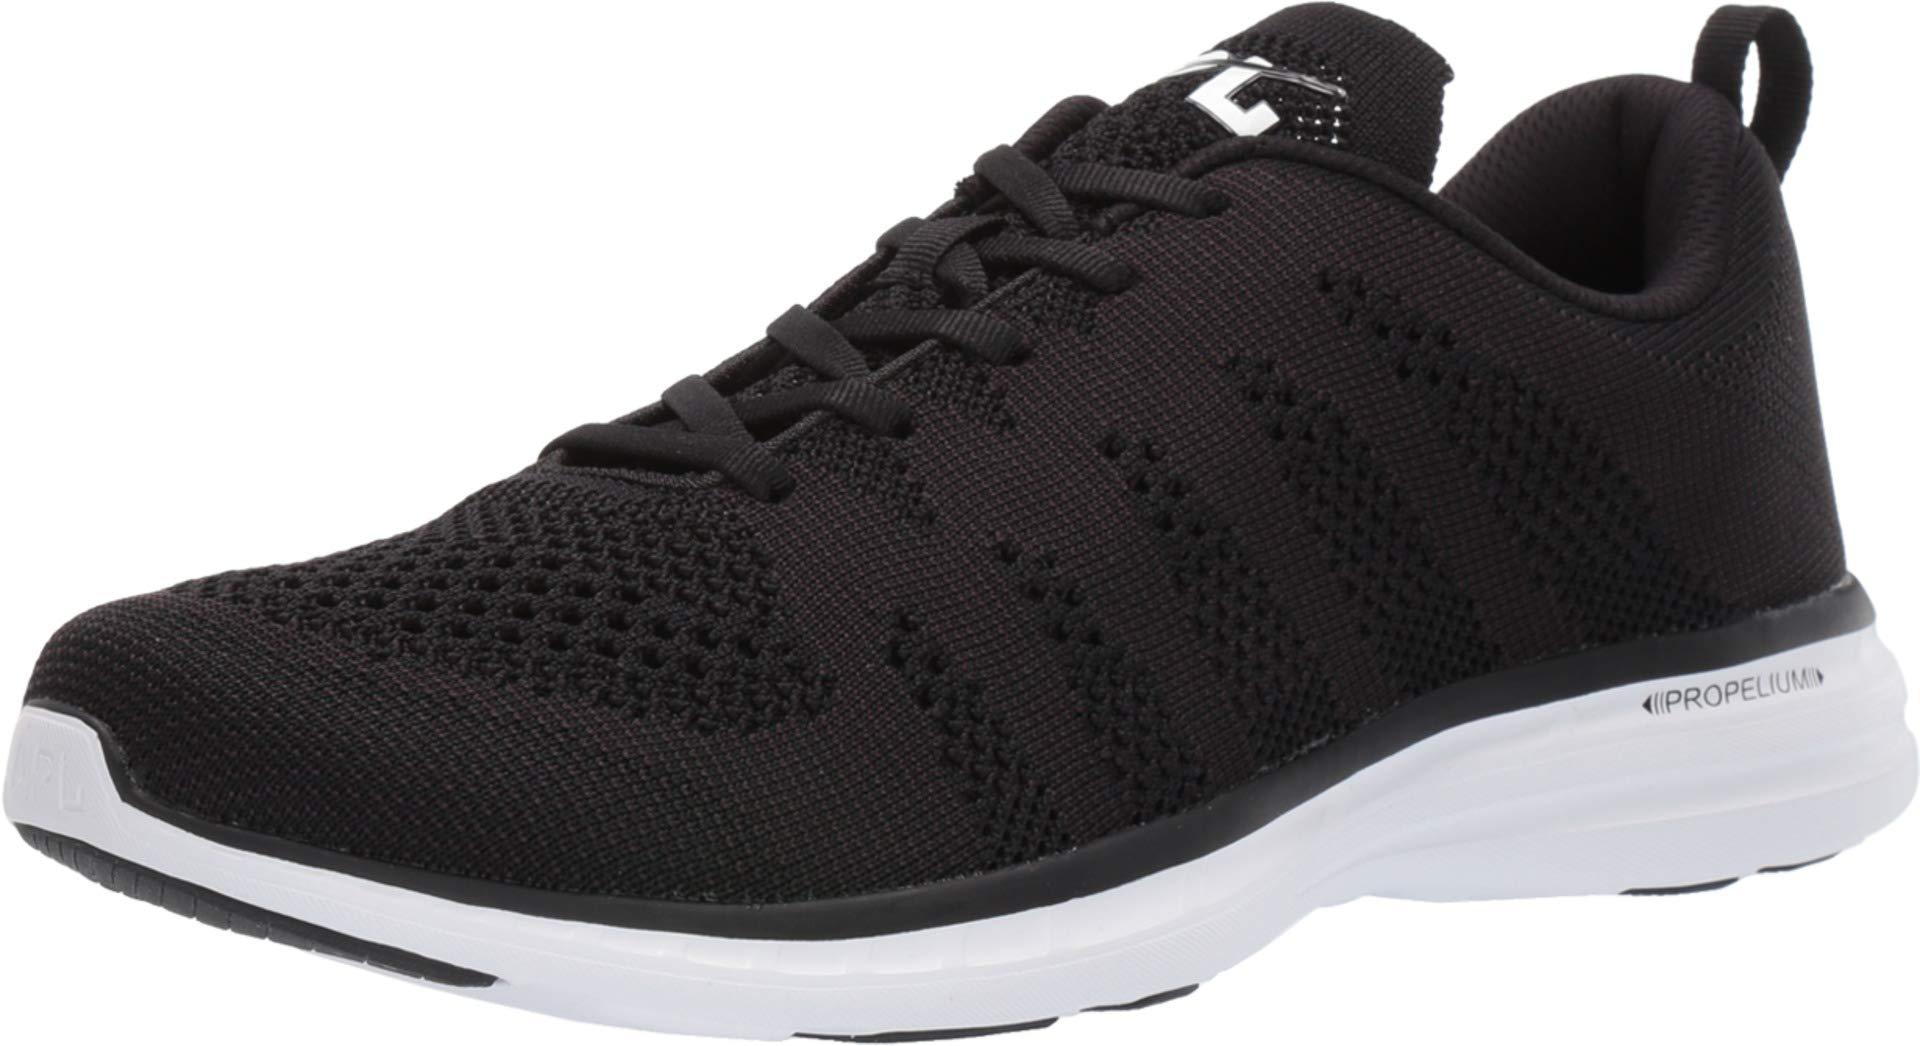 APL Shoes Synthetic Athletic Propulsion Labs in Black for Men - Lyst